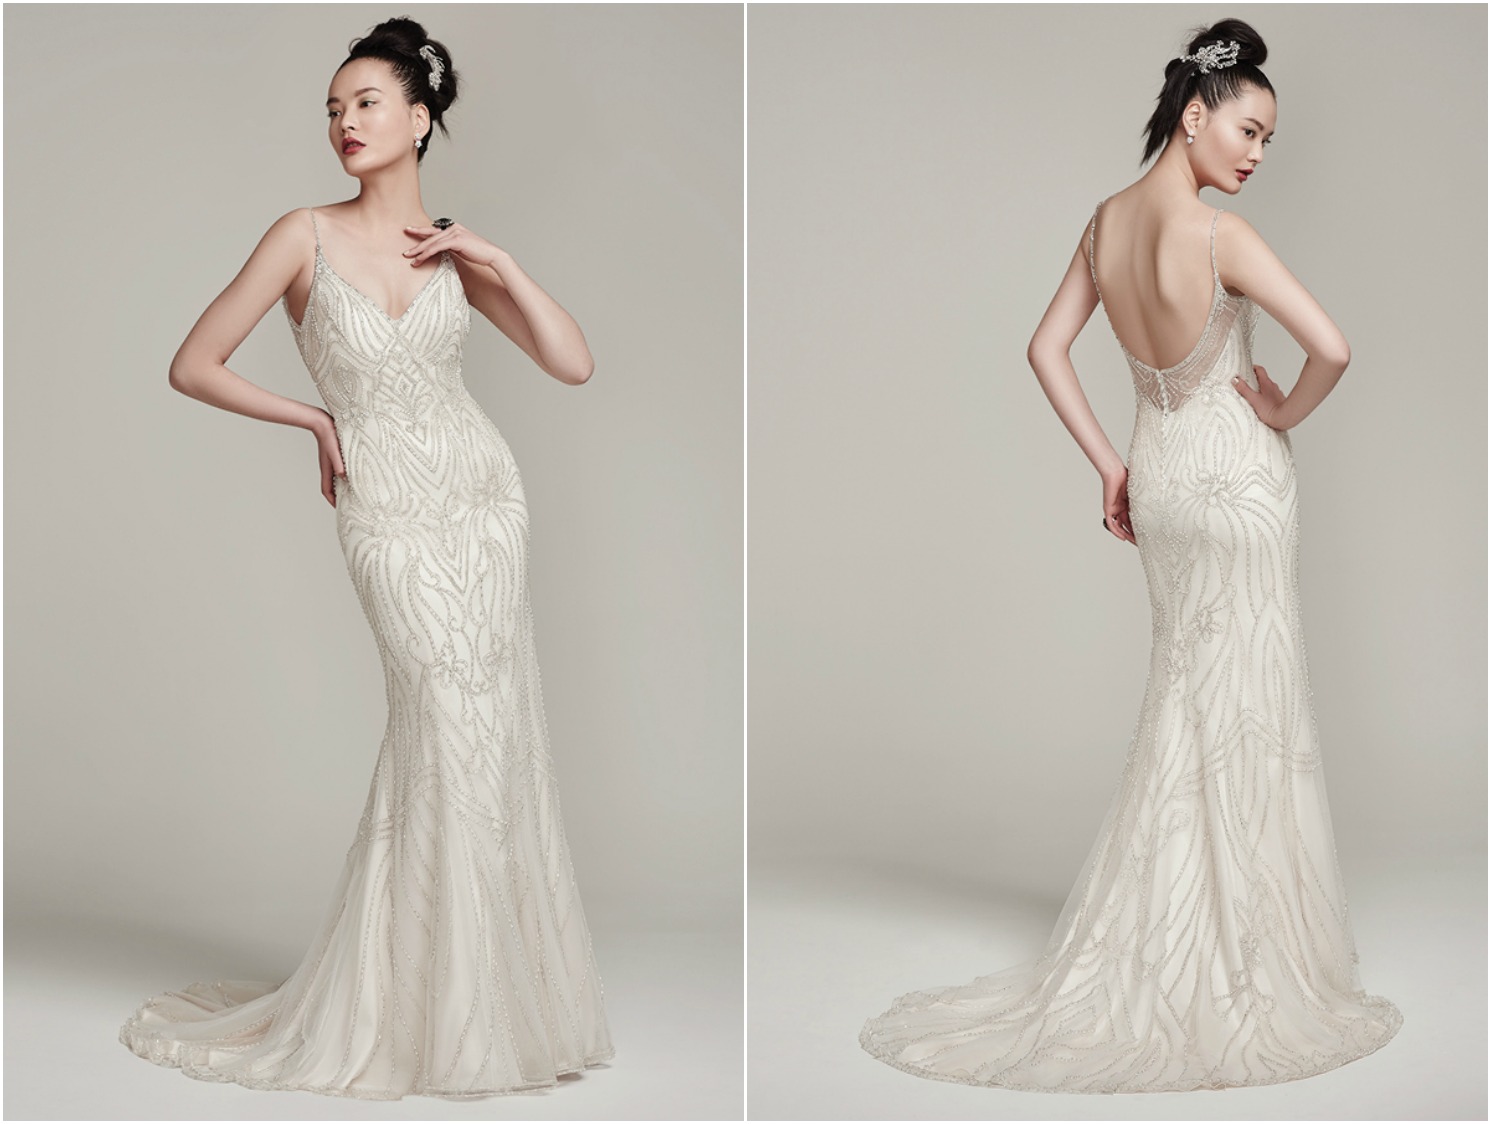 Sexy yet subtle, this chic sheath wedding dress is accented with embroidery and features Swarovski crystals embellishing the bodice and delicate spaghetti straps before falling into a plunging illusion back. Finished with crystal buttons over zipper closure.

<a href="https://www.maggiesottero.com/sottero-and-midgley/mikelle/9871" target="_blank">Sottero &amp; Midgley</a>